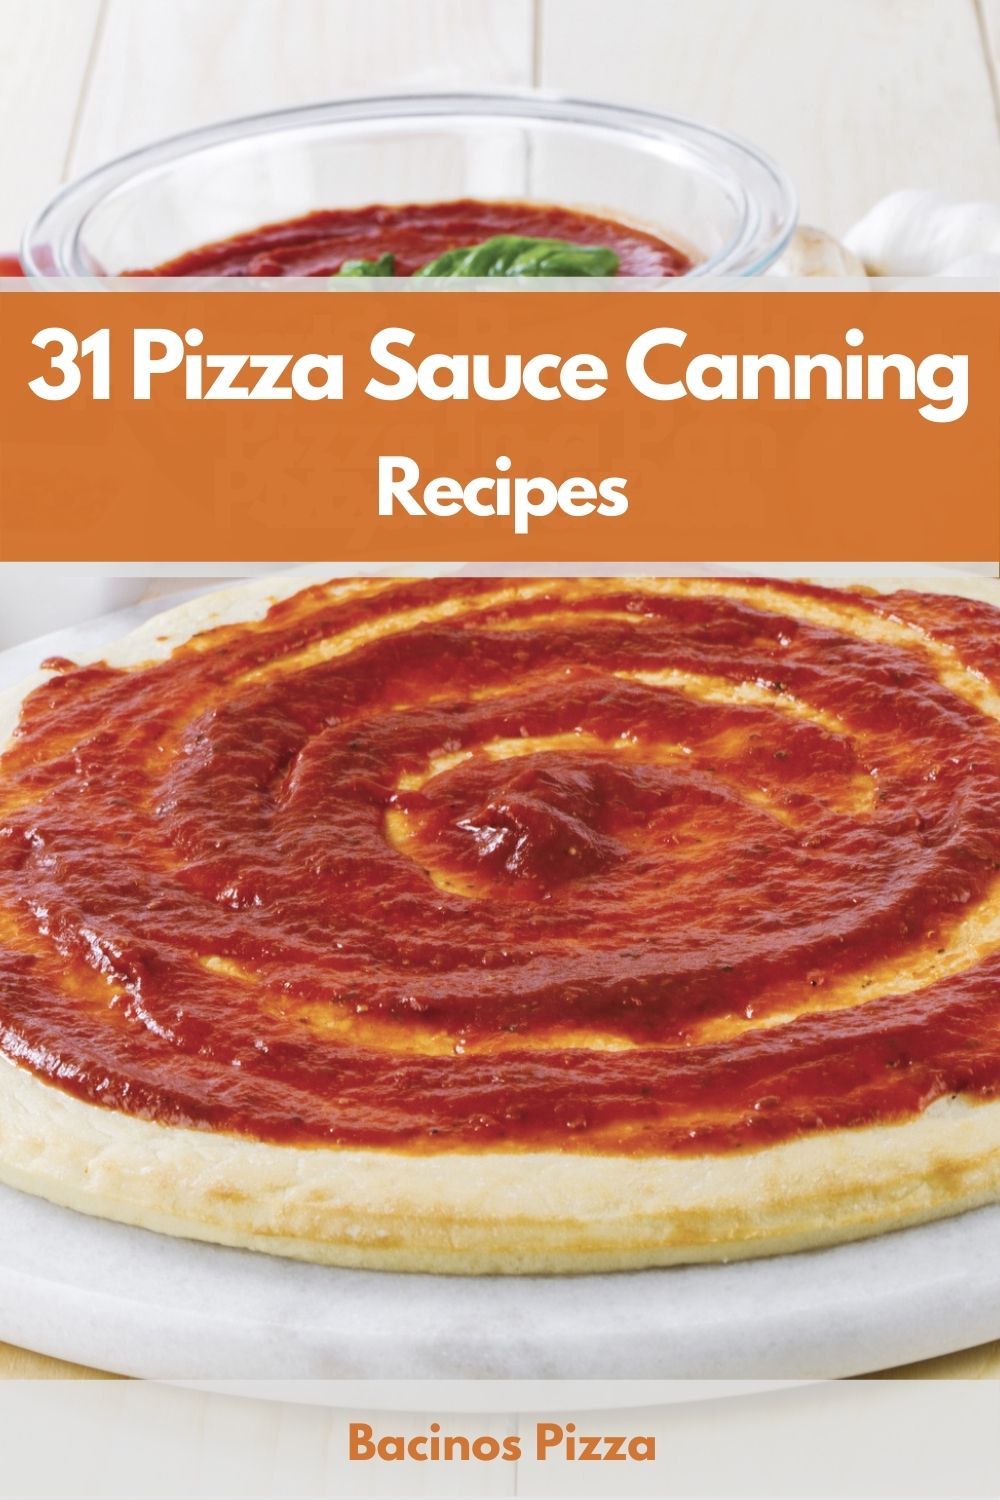 31 Pizza Sauce Canning Recipes pin